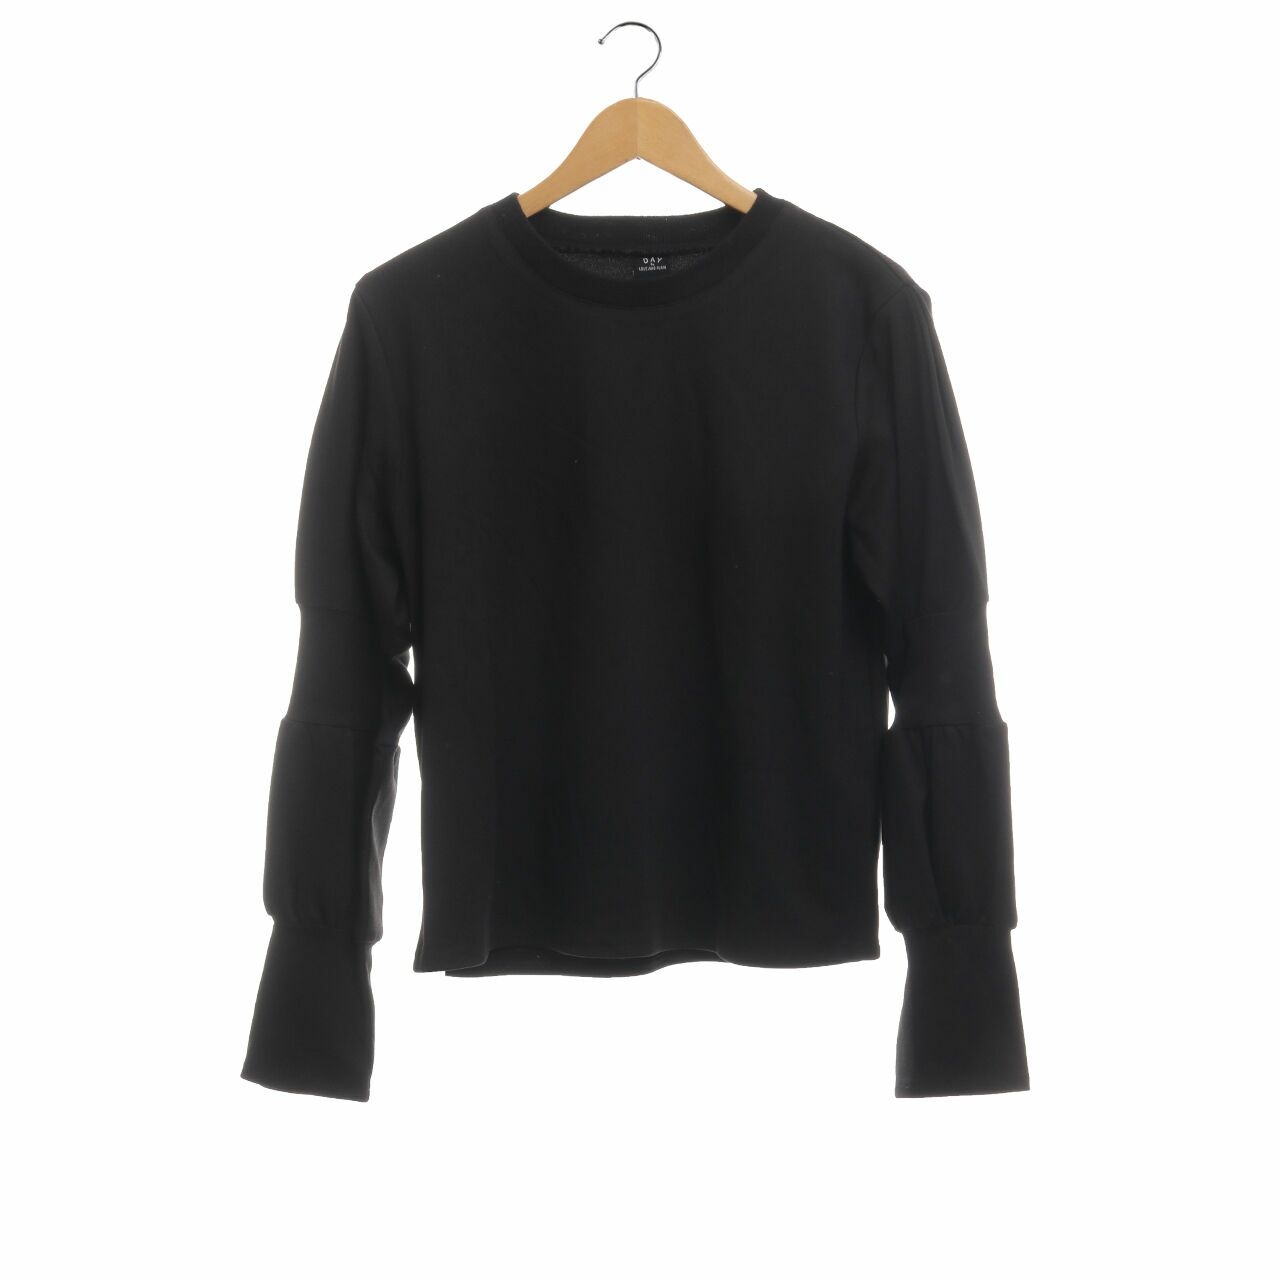 Day by Love And flair Black Sweater